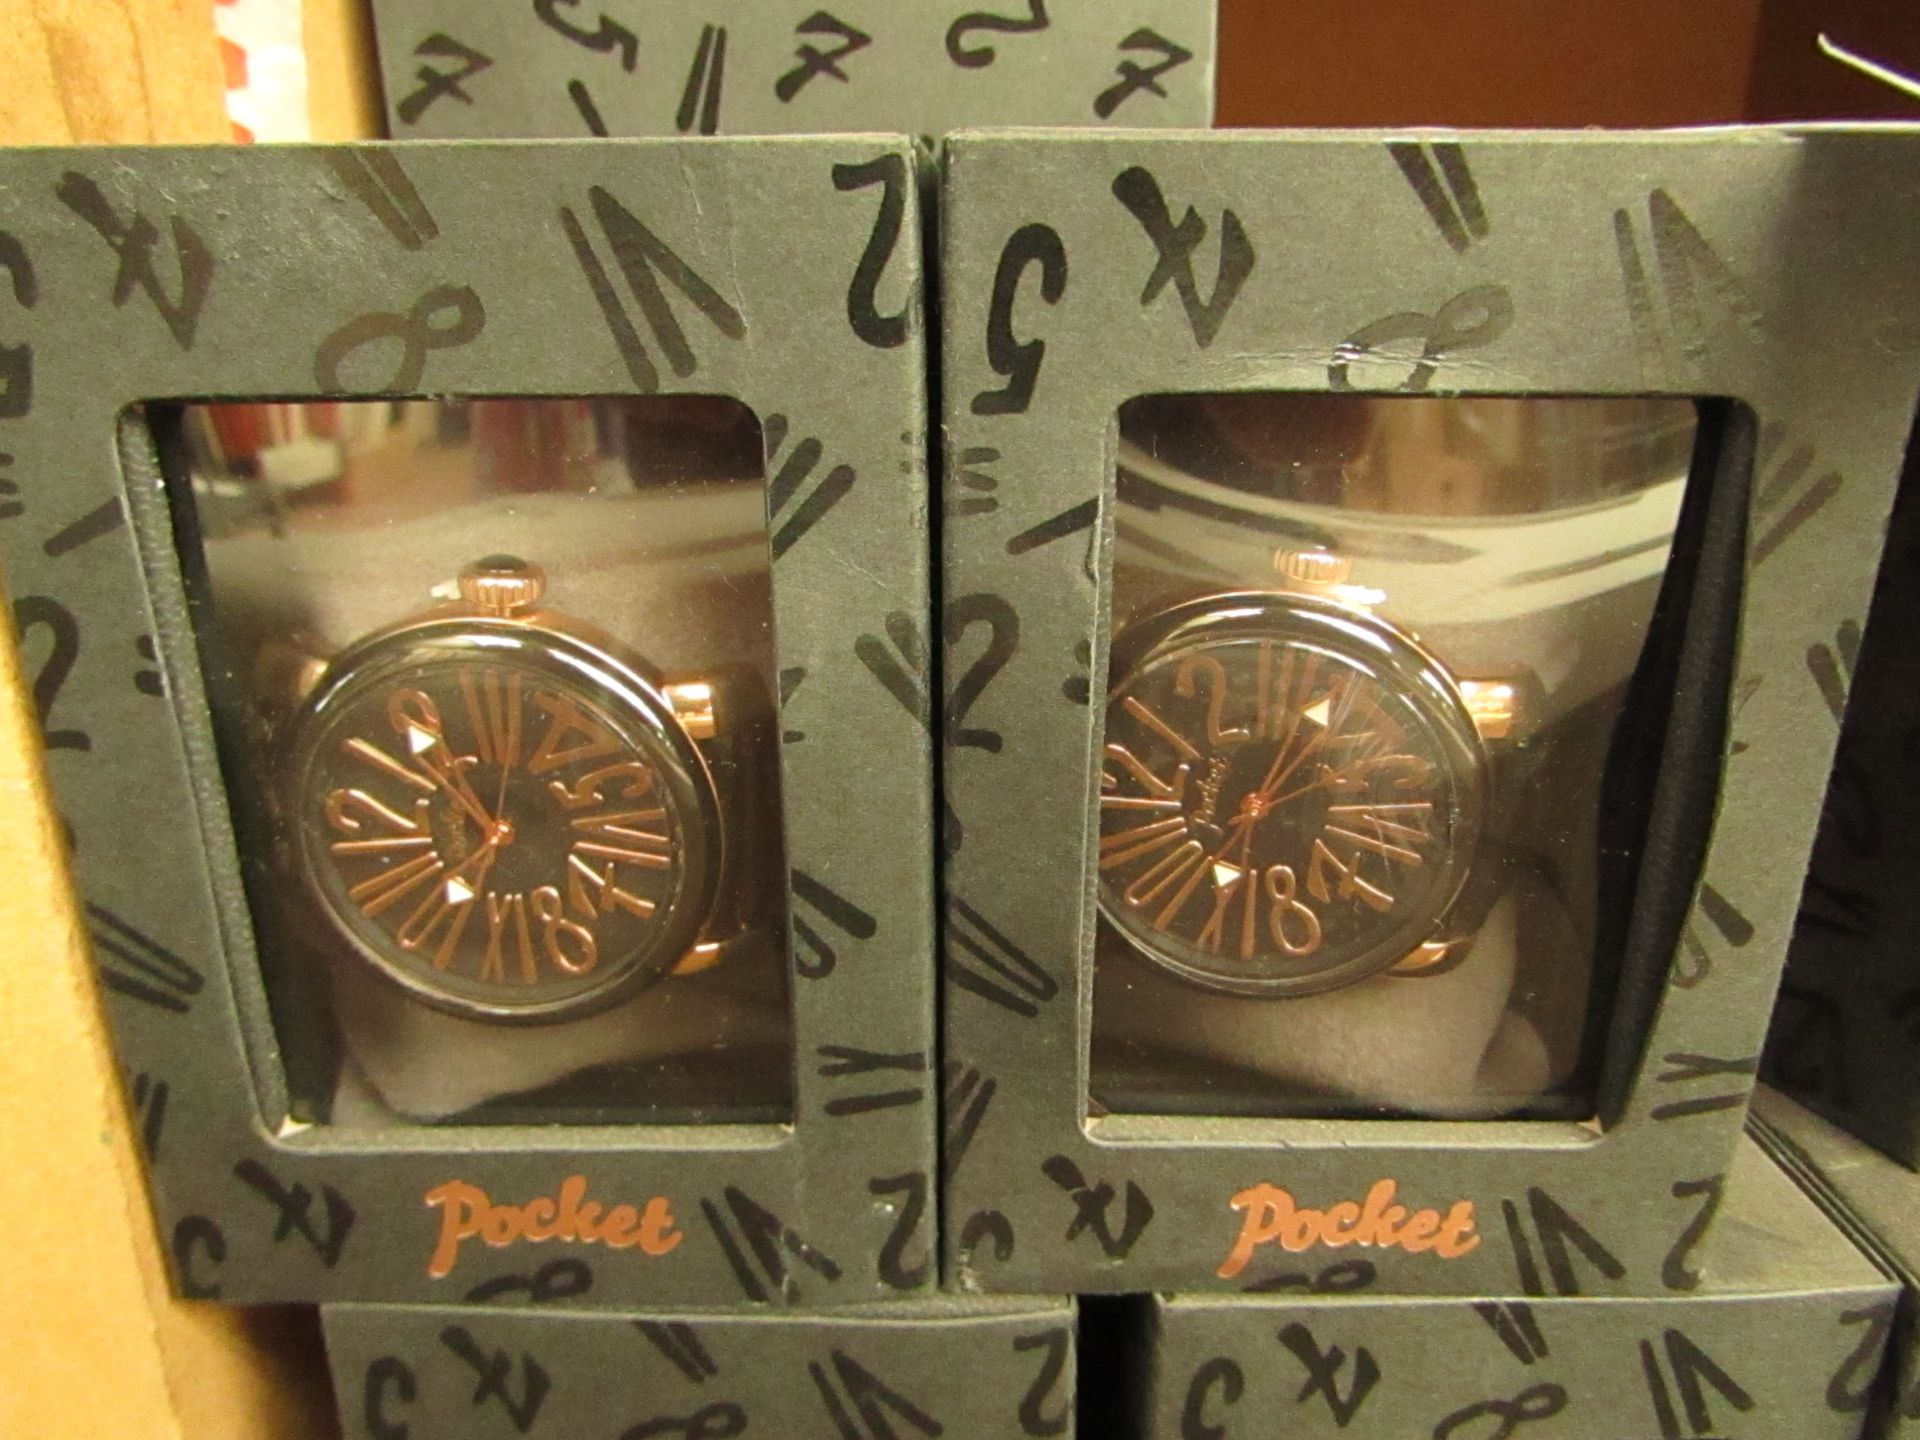 2 x Pocket Branded Watches. Boxed